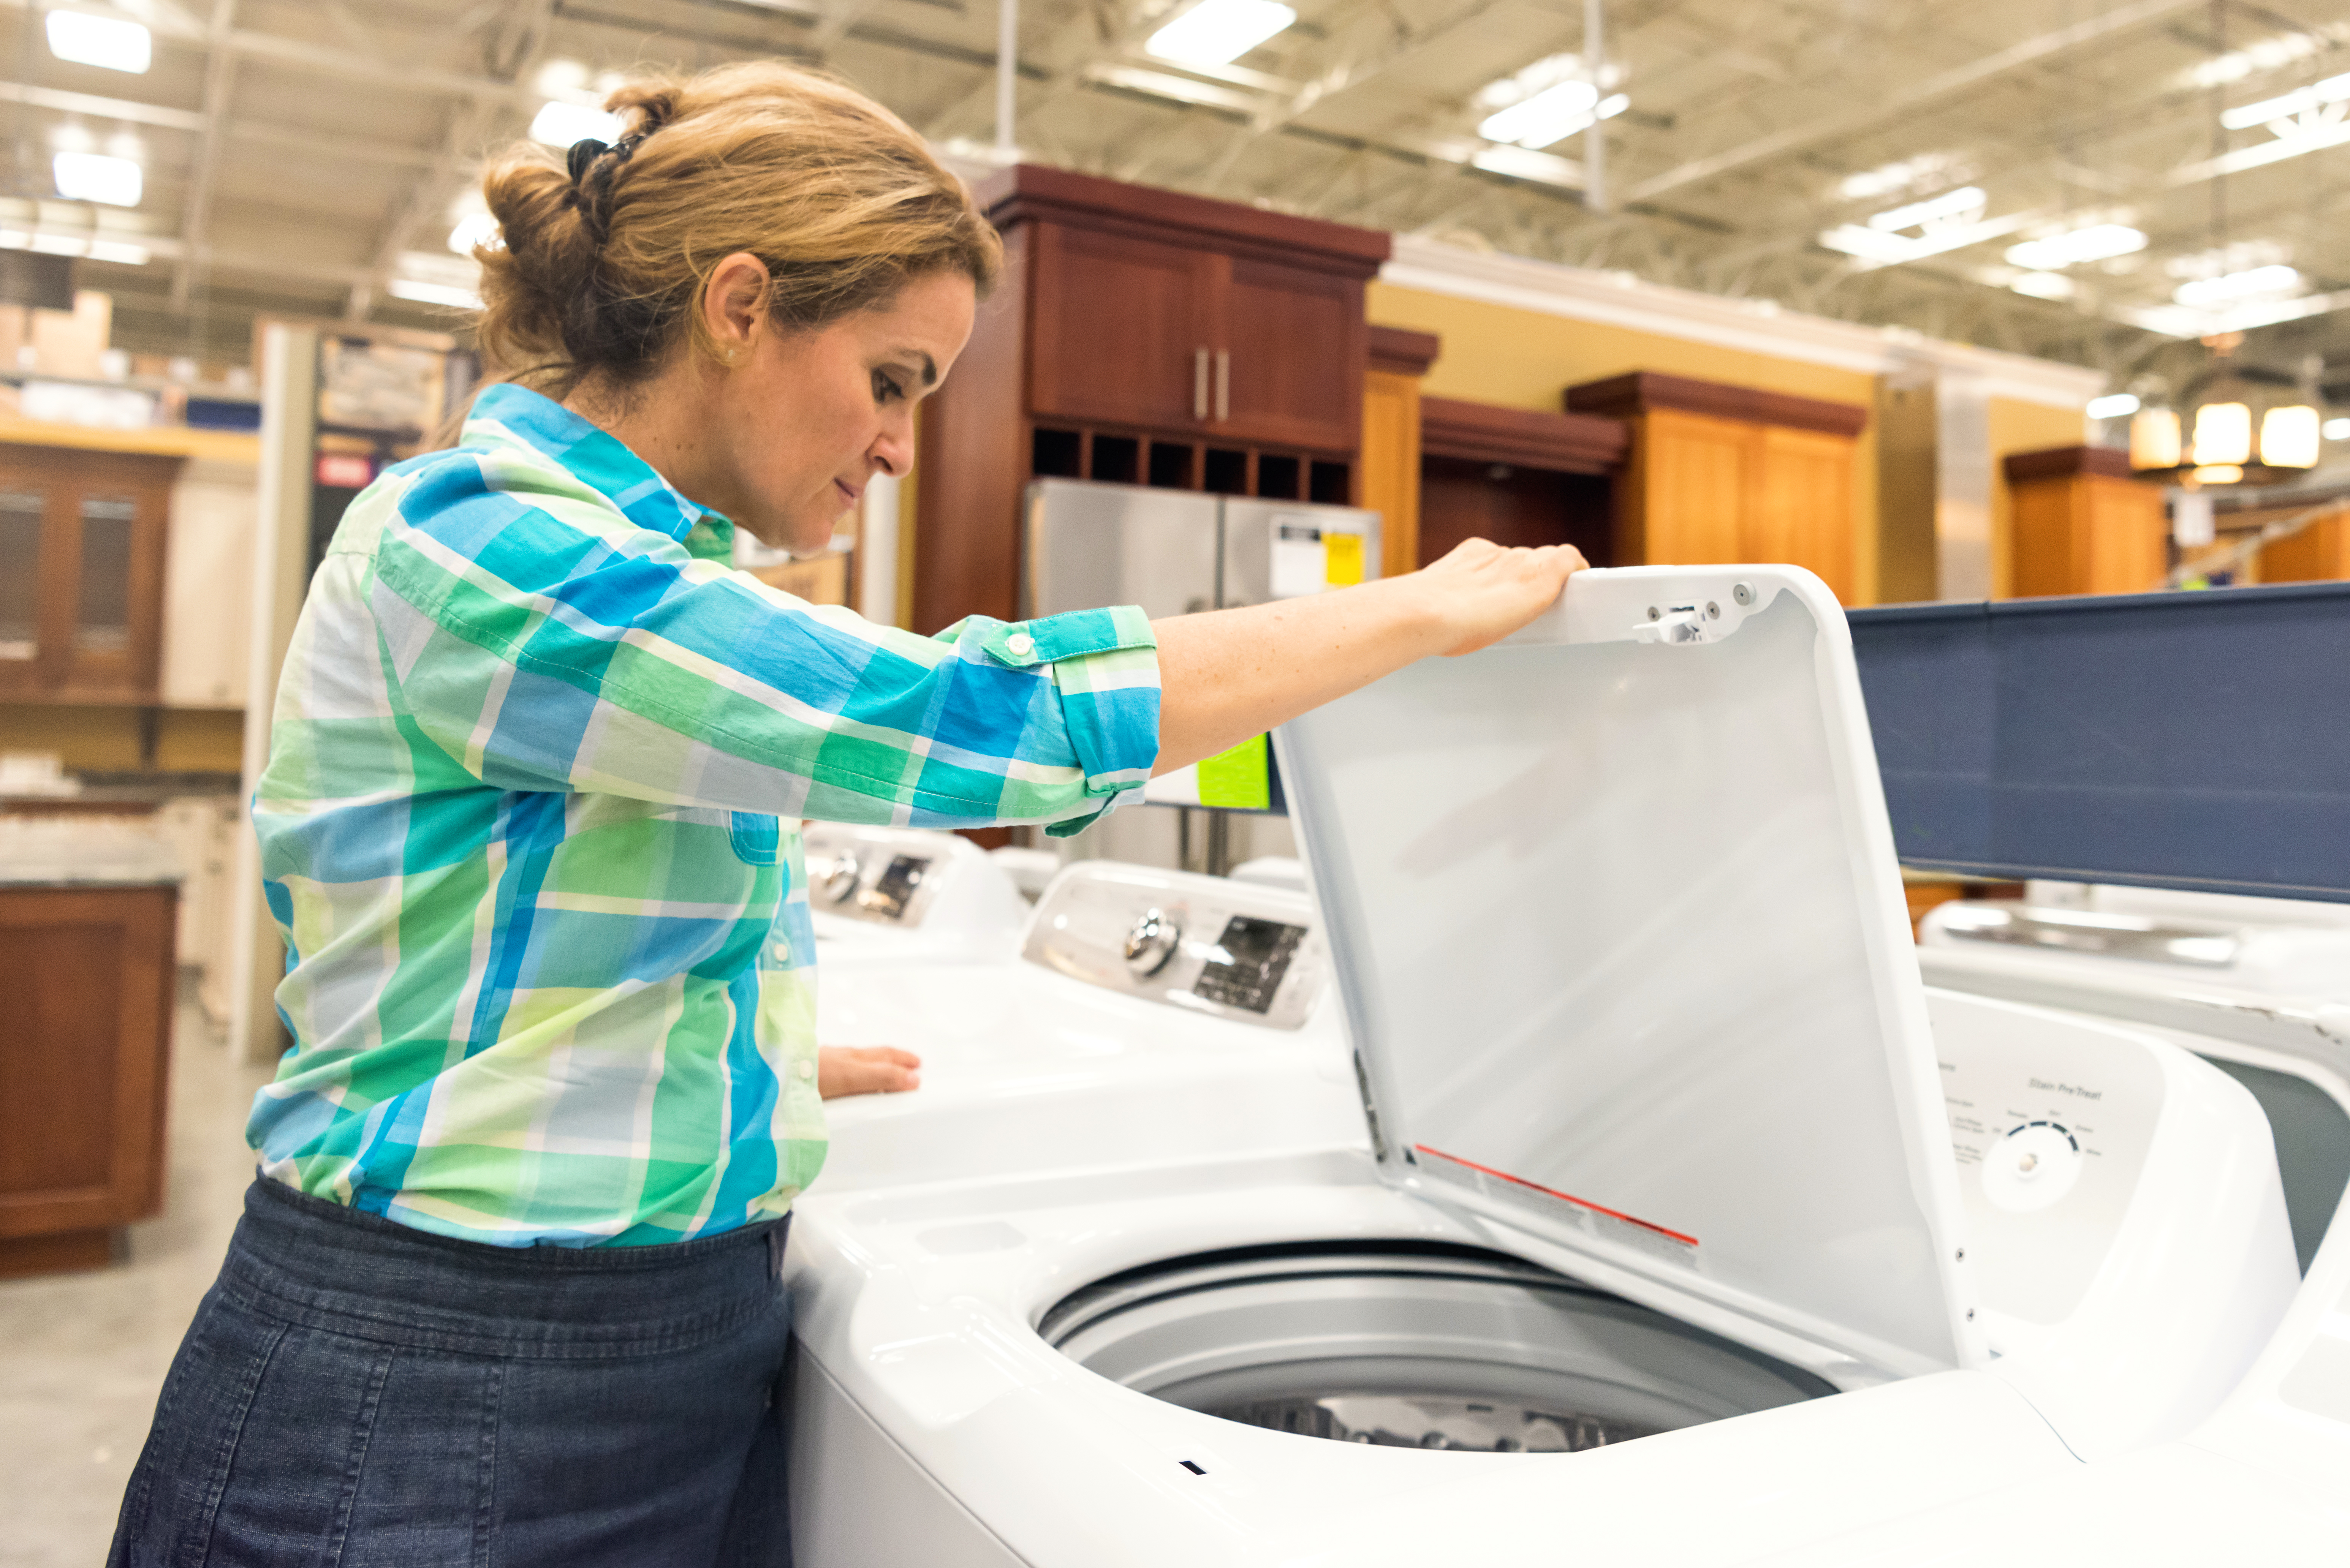 Woman in a plaid shirt looking into a top load washer in an appliance store 